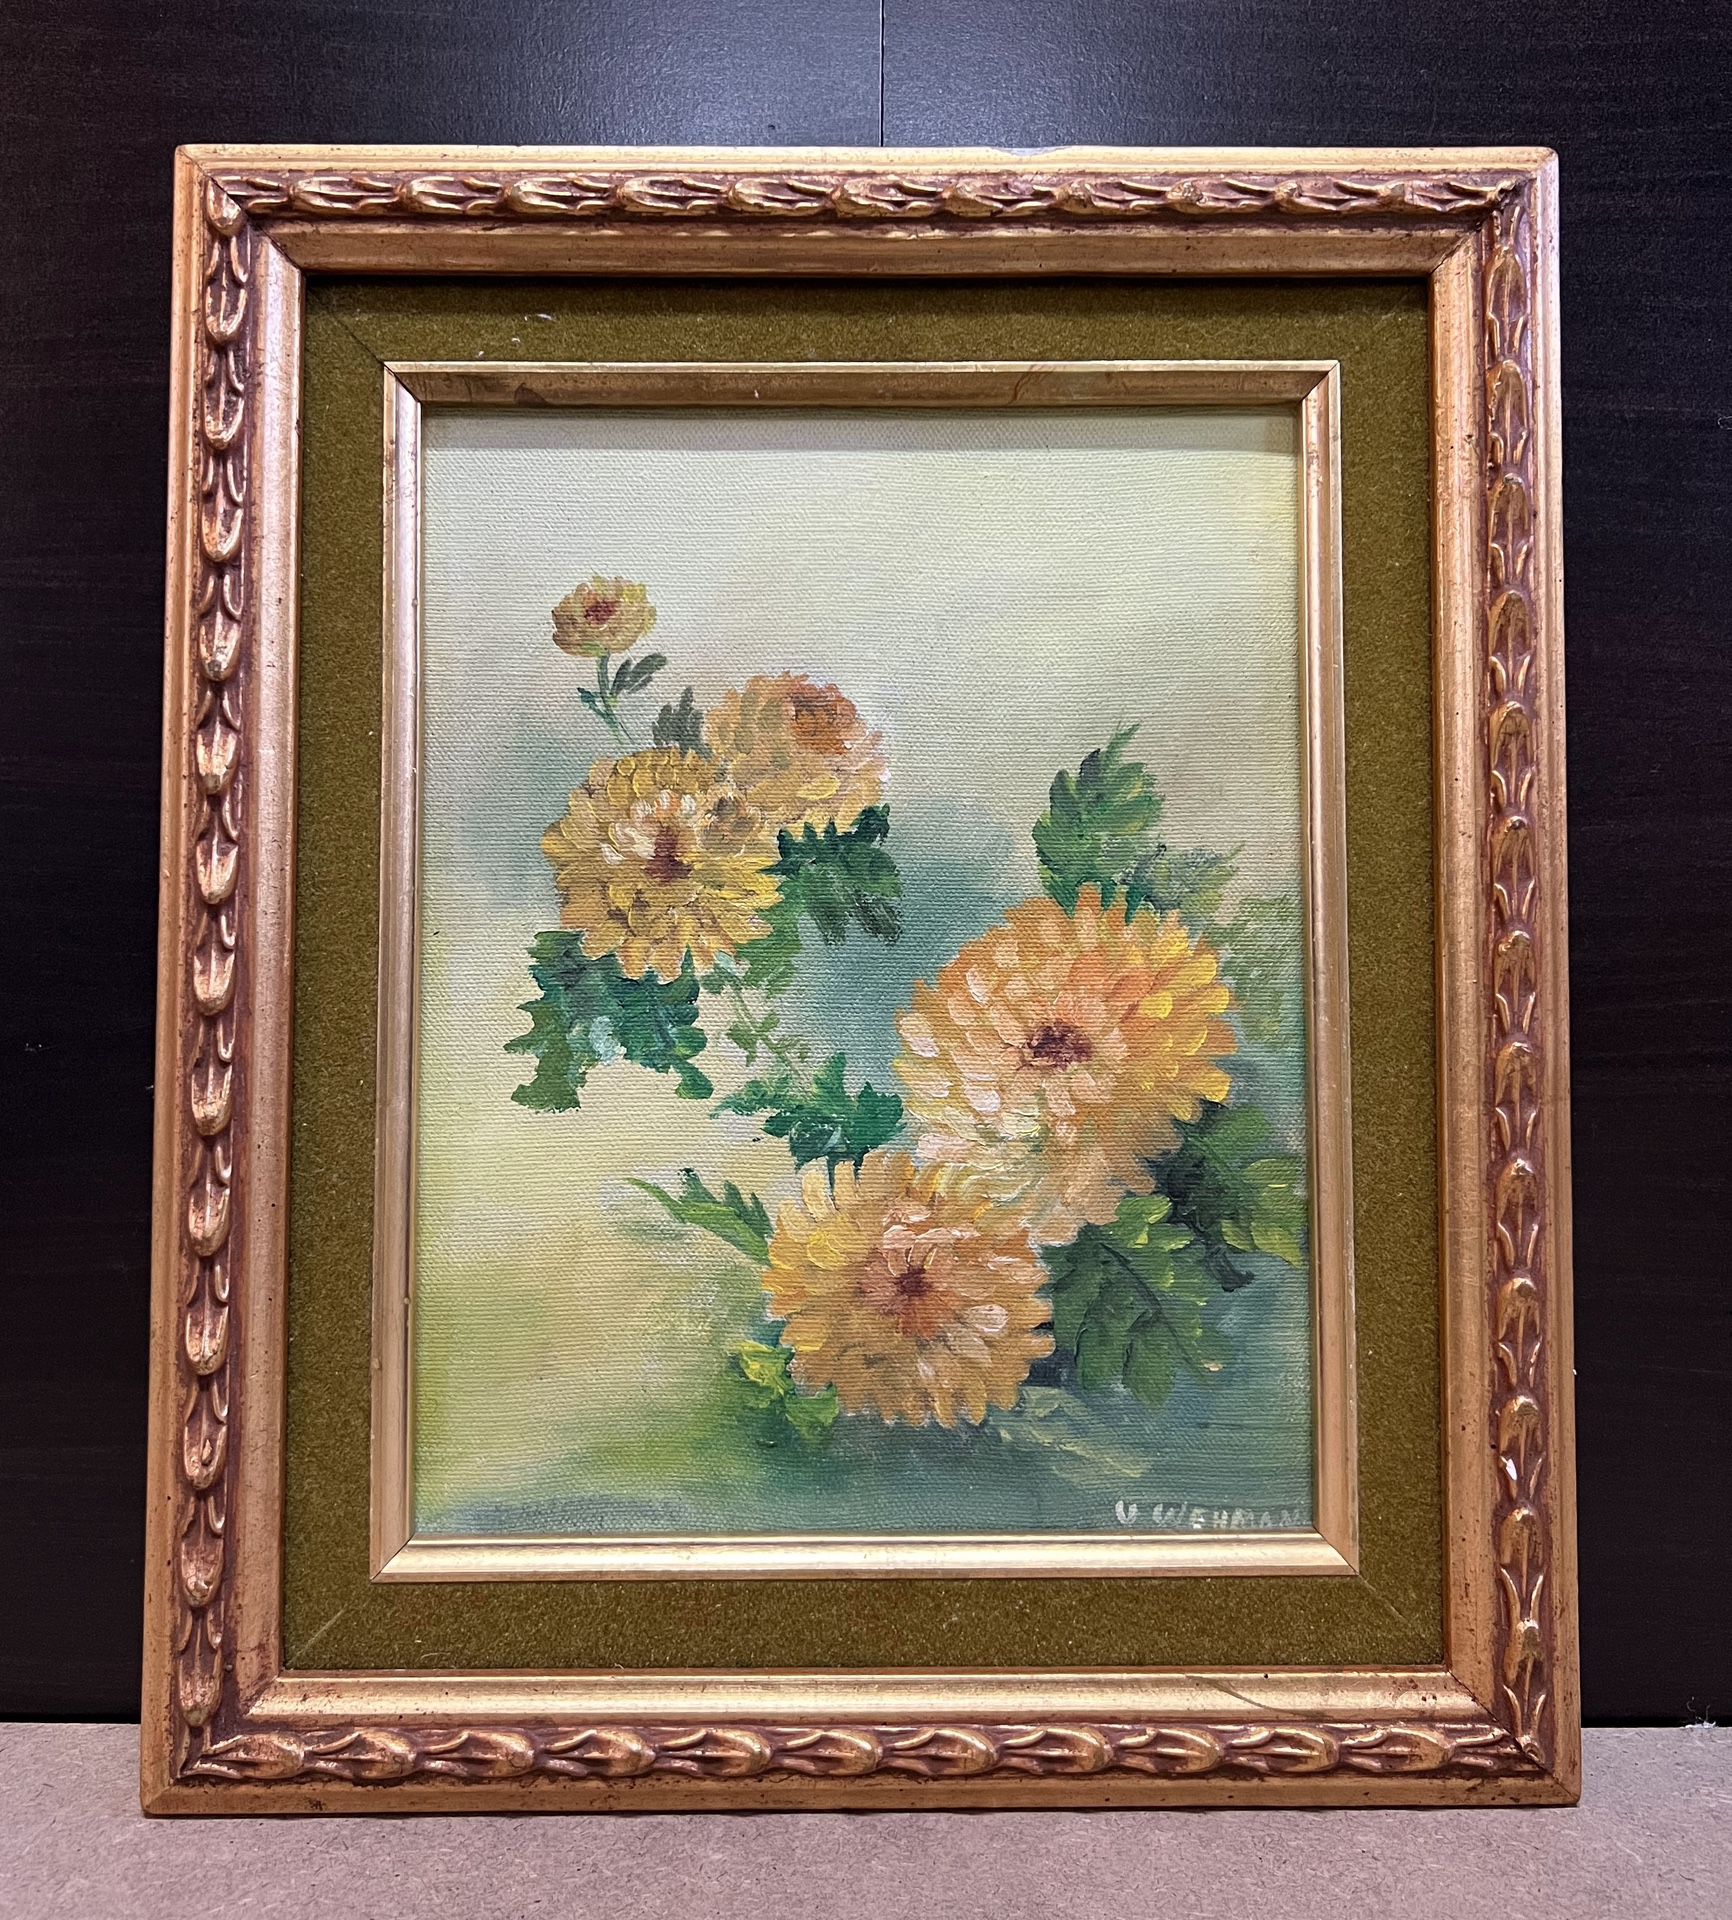 30% off SALE Original Oil painting, “Blooming Flowers” signed, Double-framed 